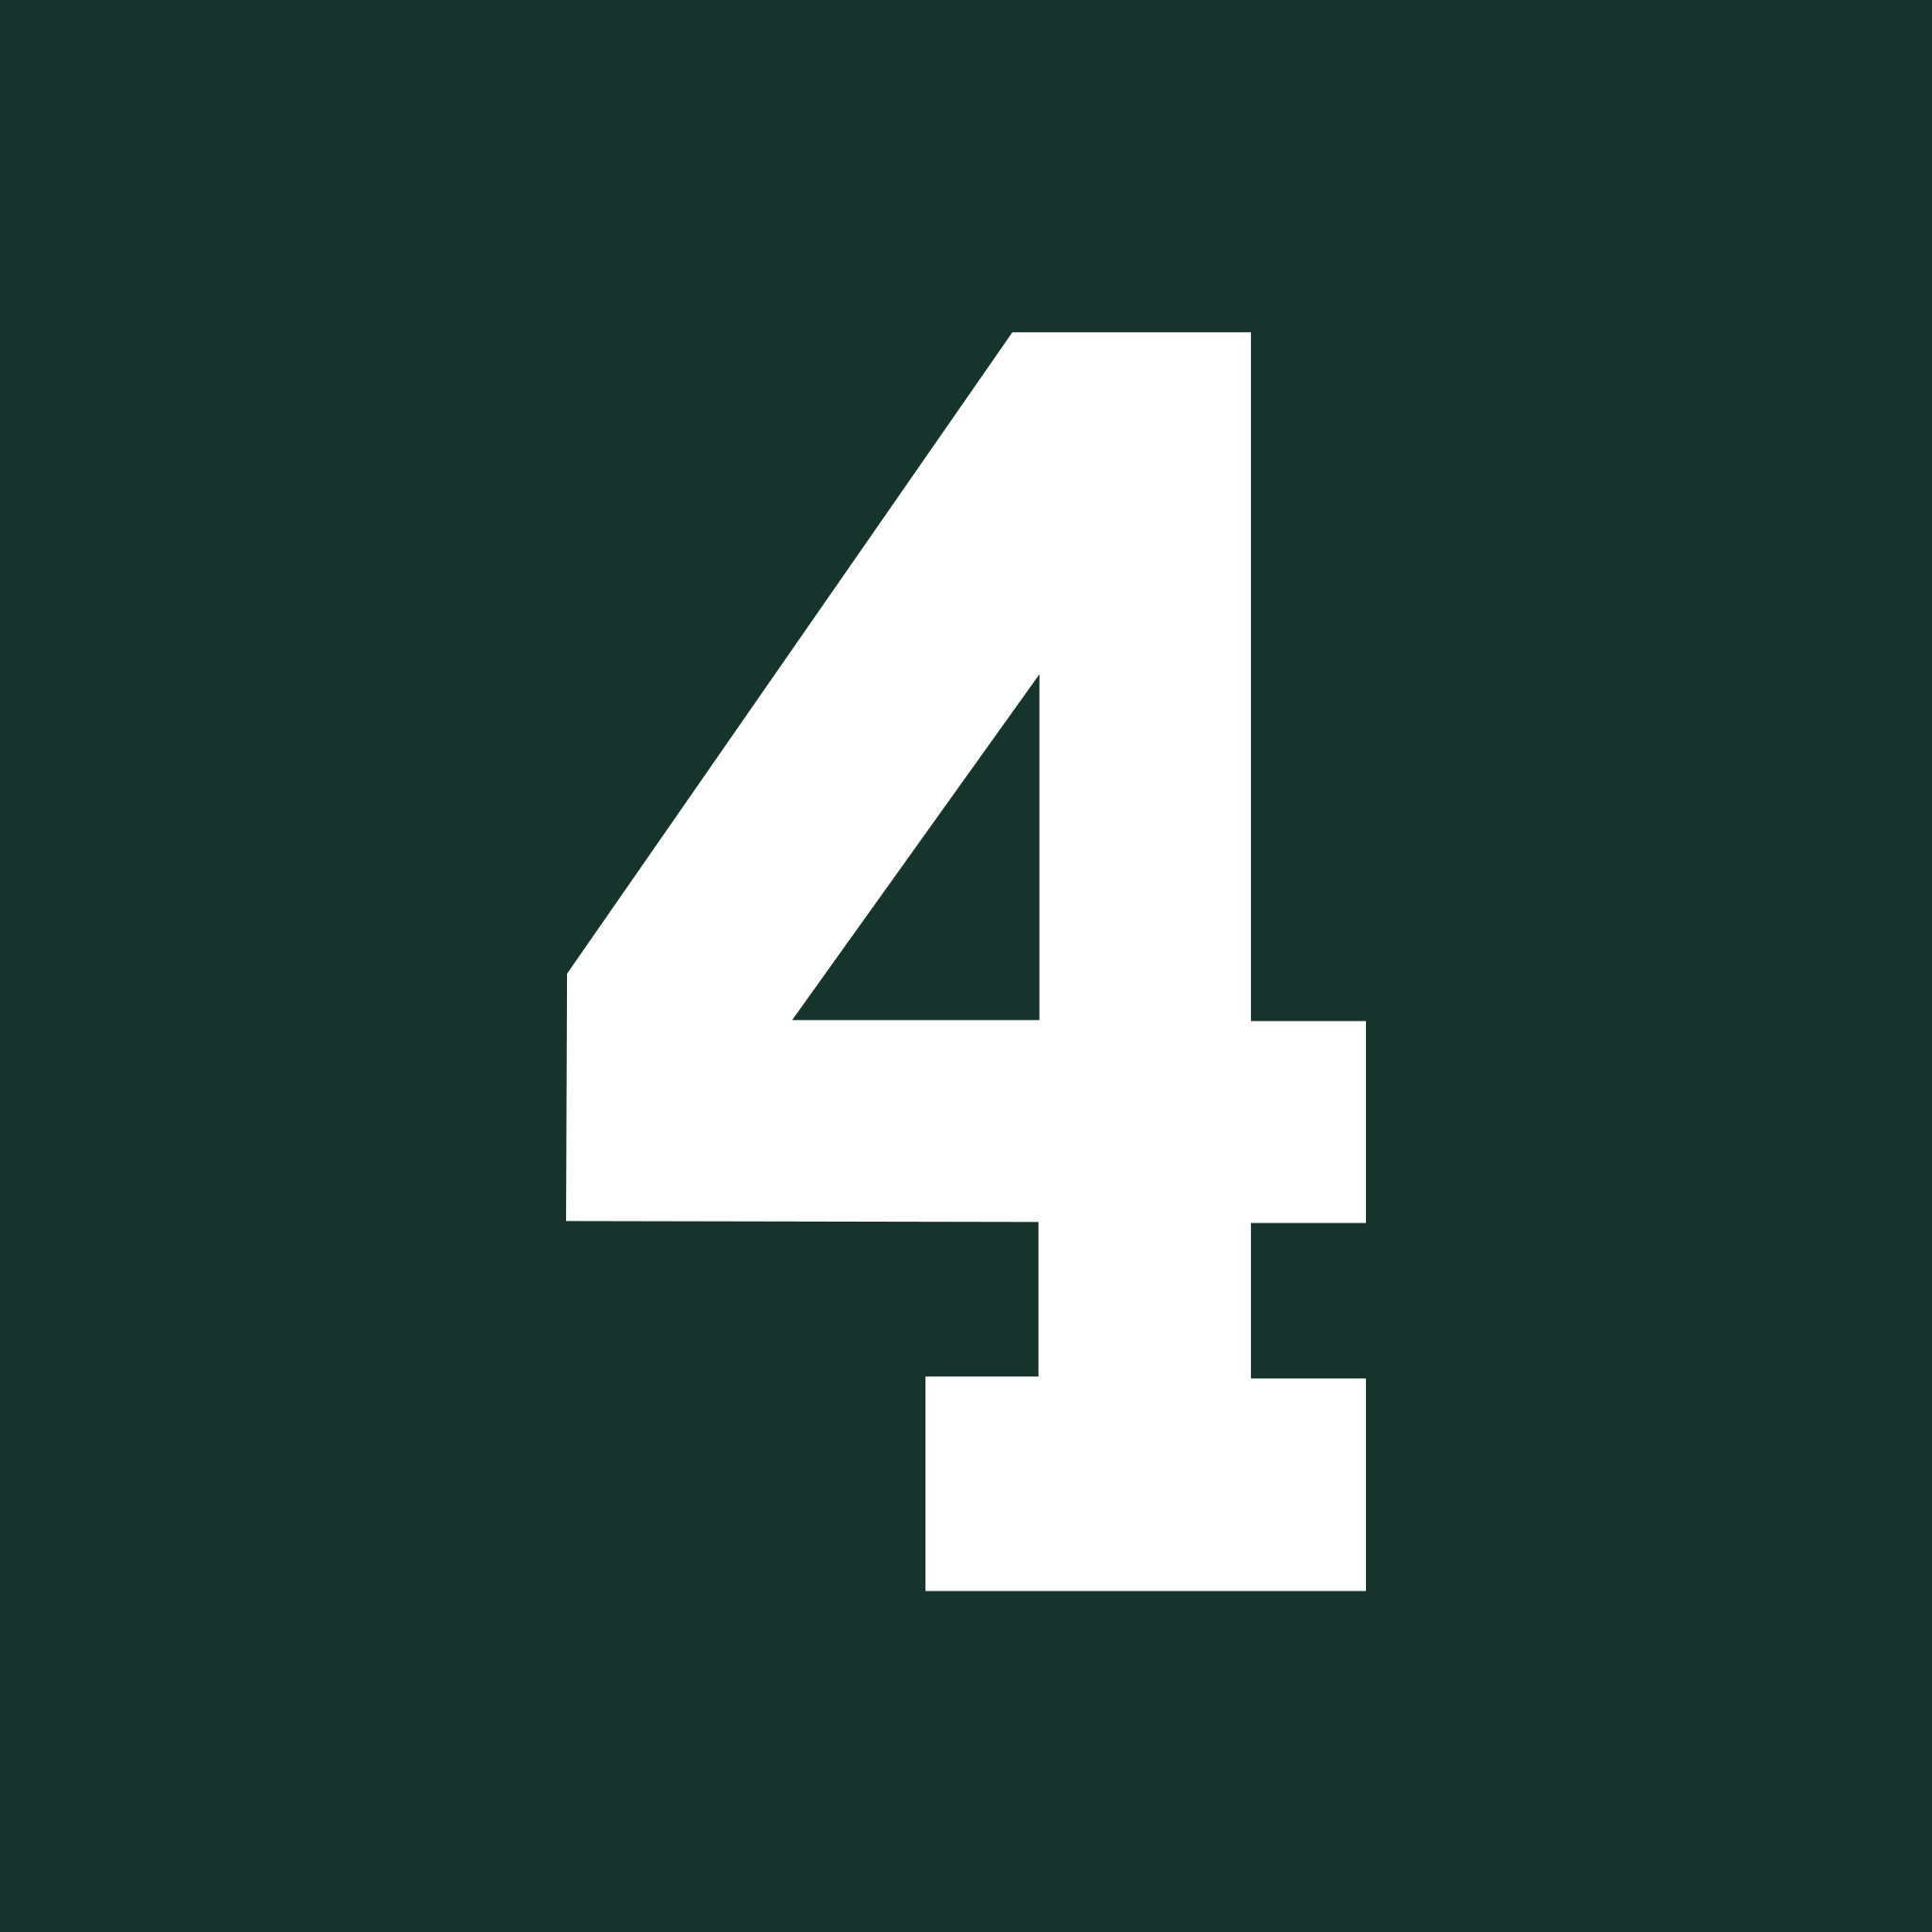 Retired number - Wikipedia